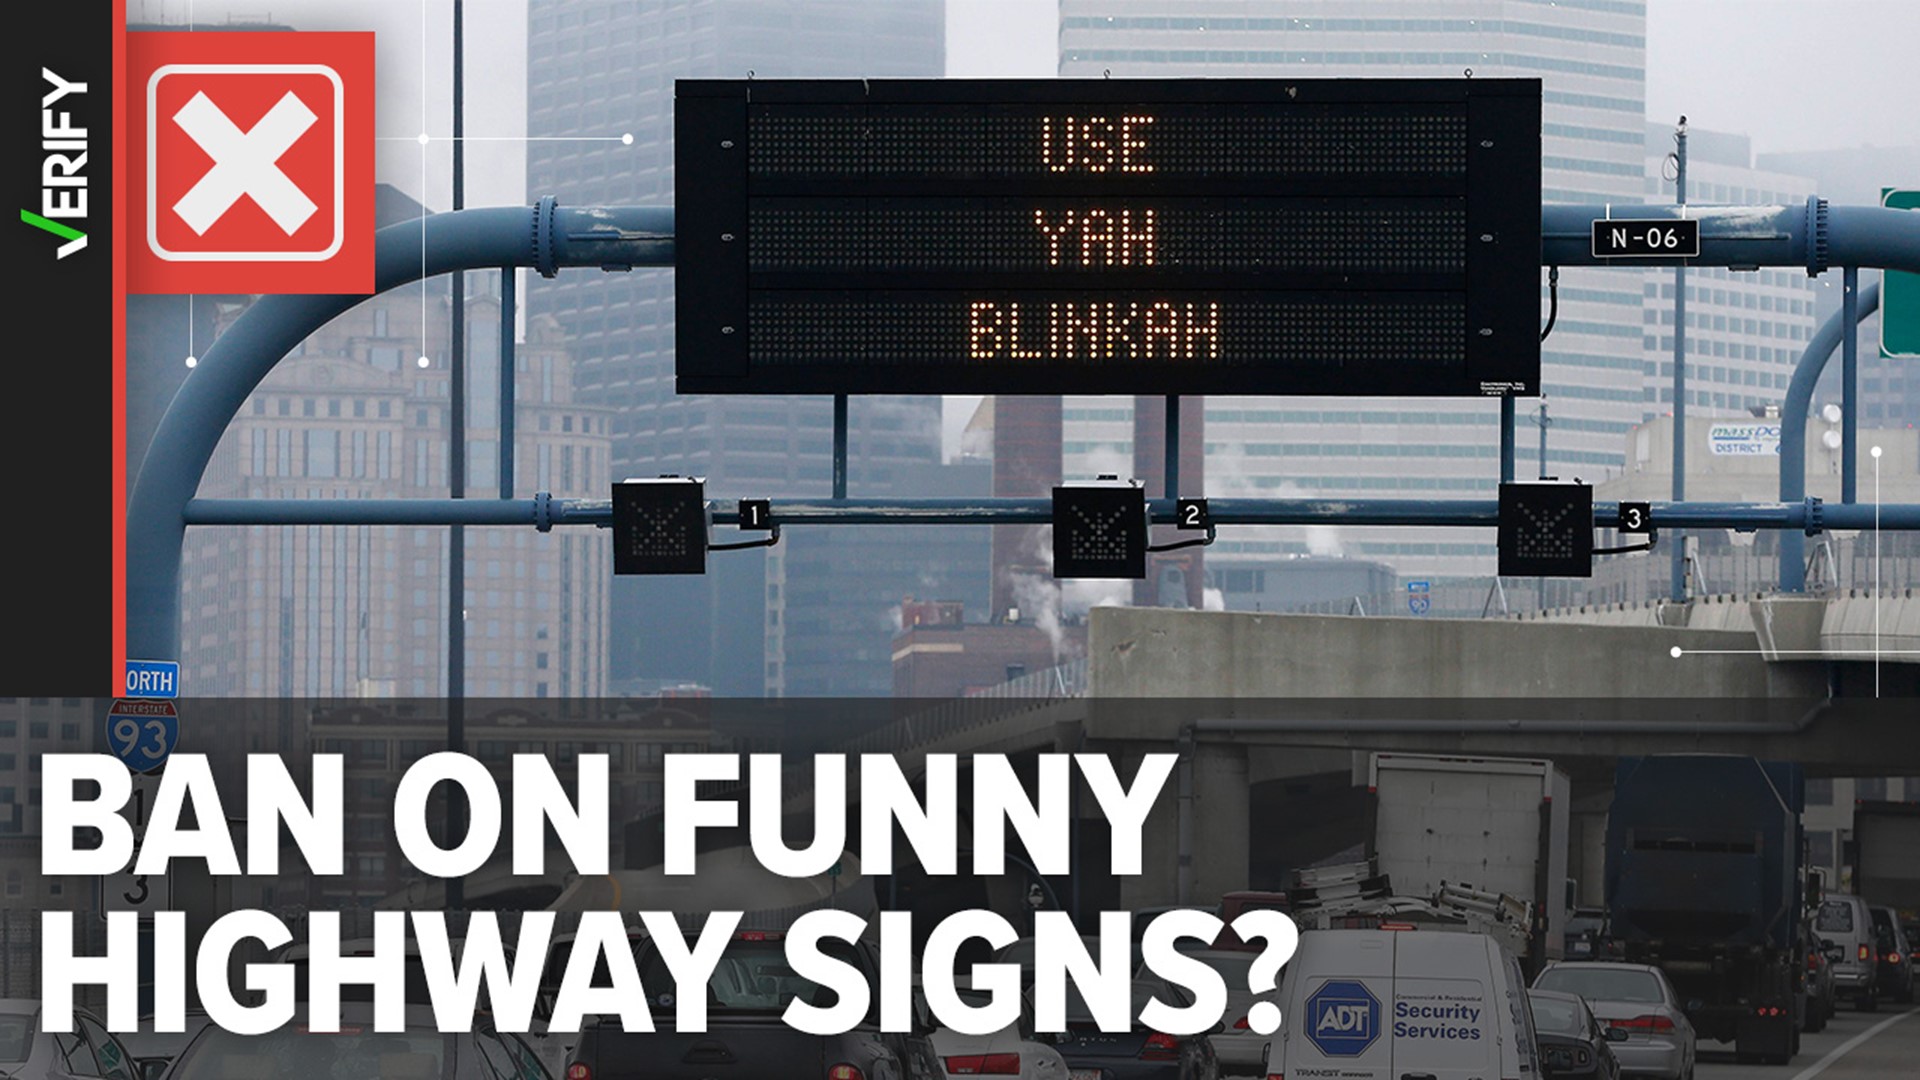 The Federal Highway Administration is not banning clever, quirky messaging on electronic highway signs, but the agency is discouraging their use.